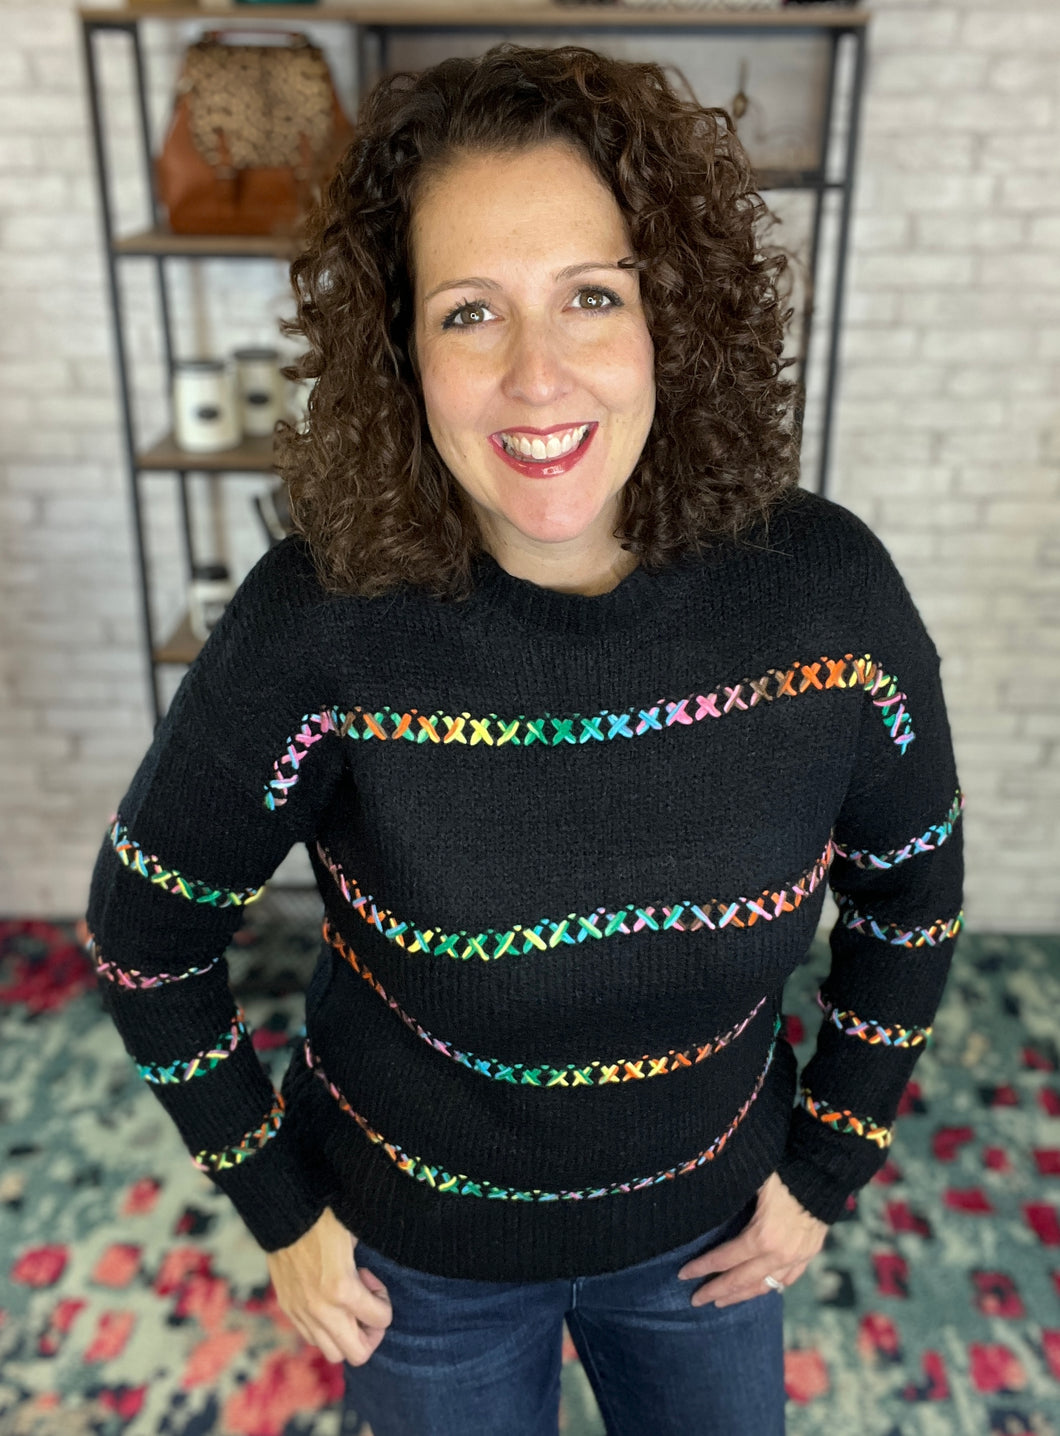 Sweater with Multicolor Stitching